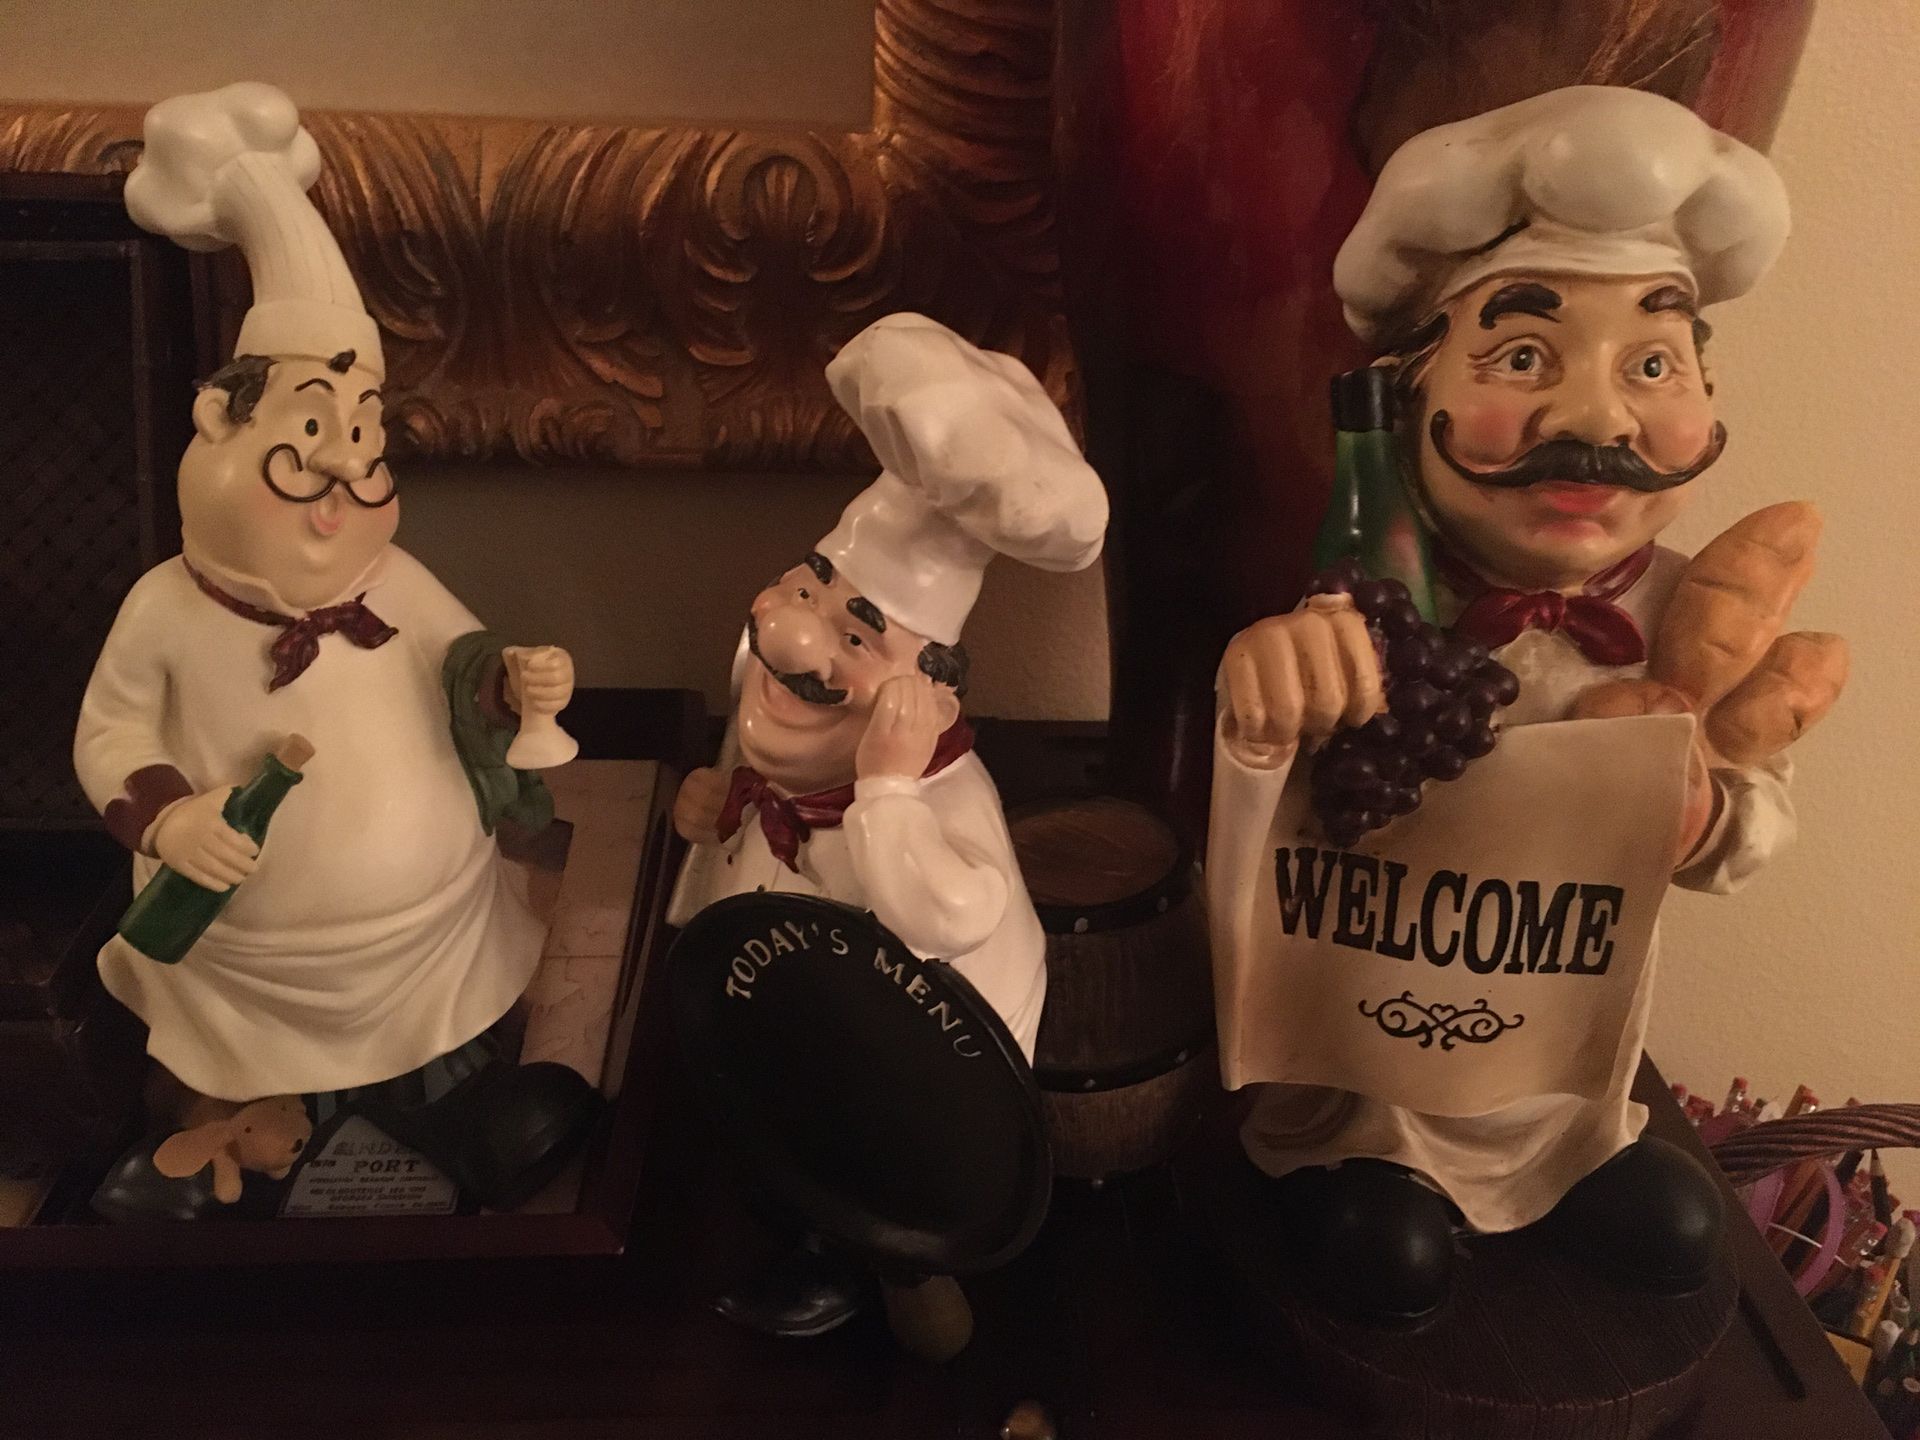 Kitchen Chef Home Decor in Great Condition